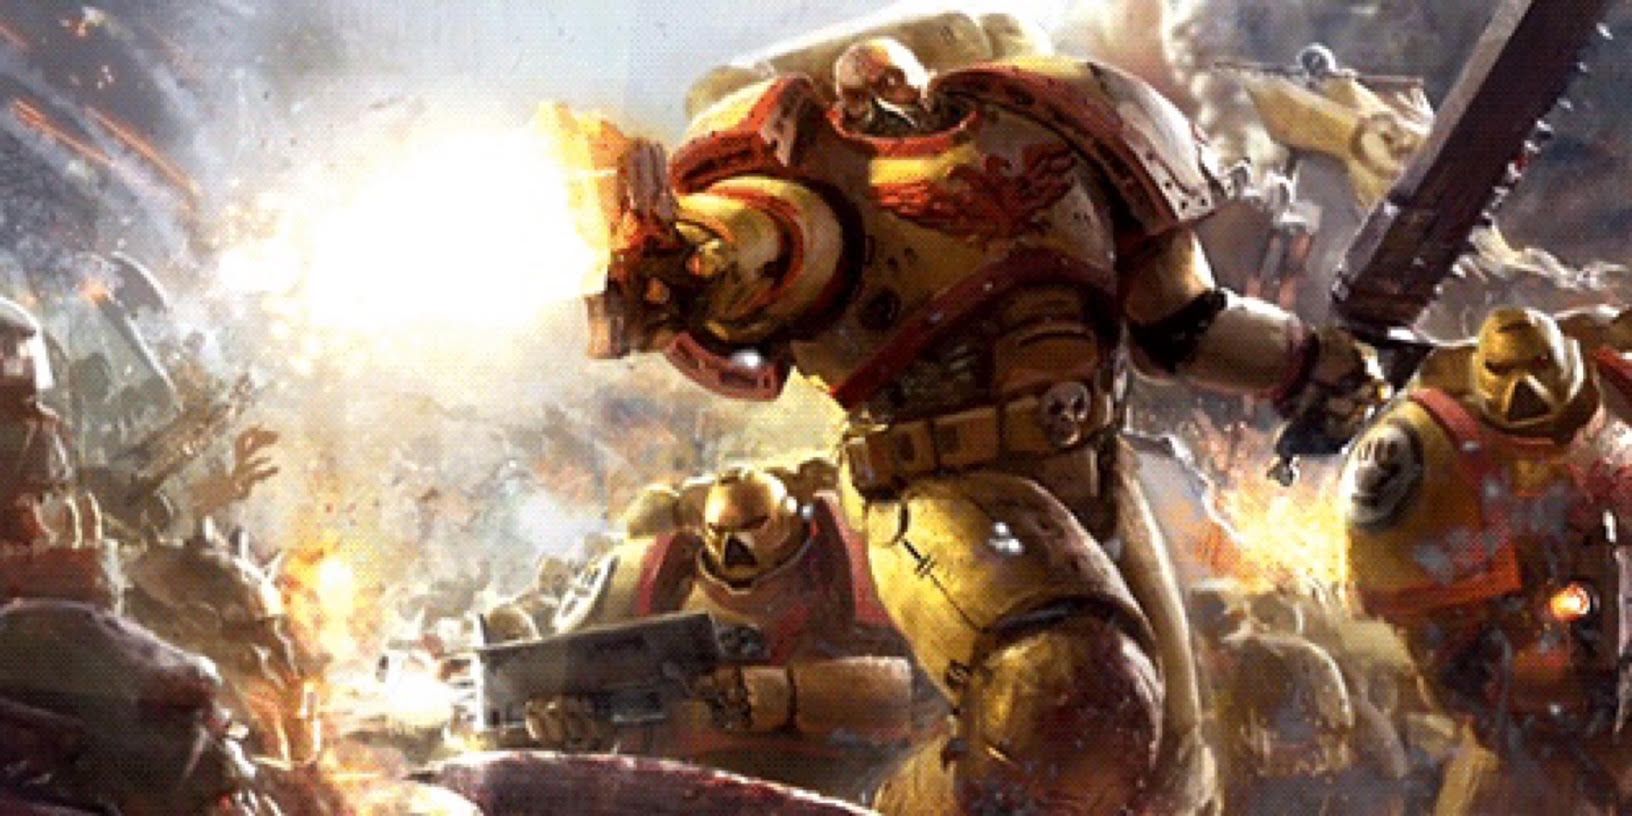 An Imperial Fists Marine fires a bolt pistol while wielding a chainsword as his fellow battle-brothers fight behind him